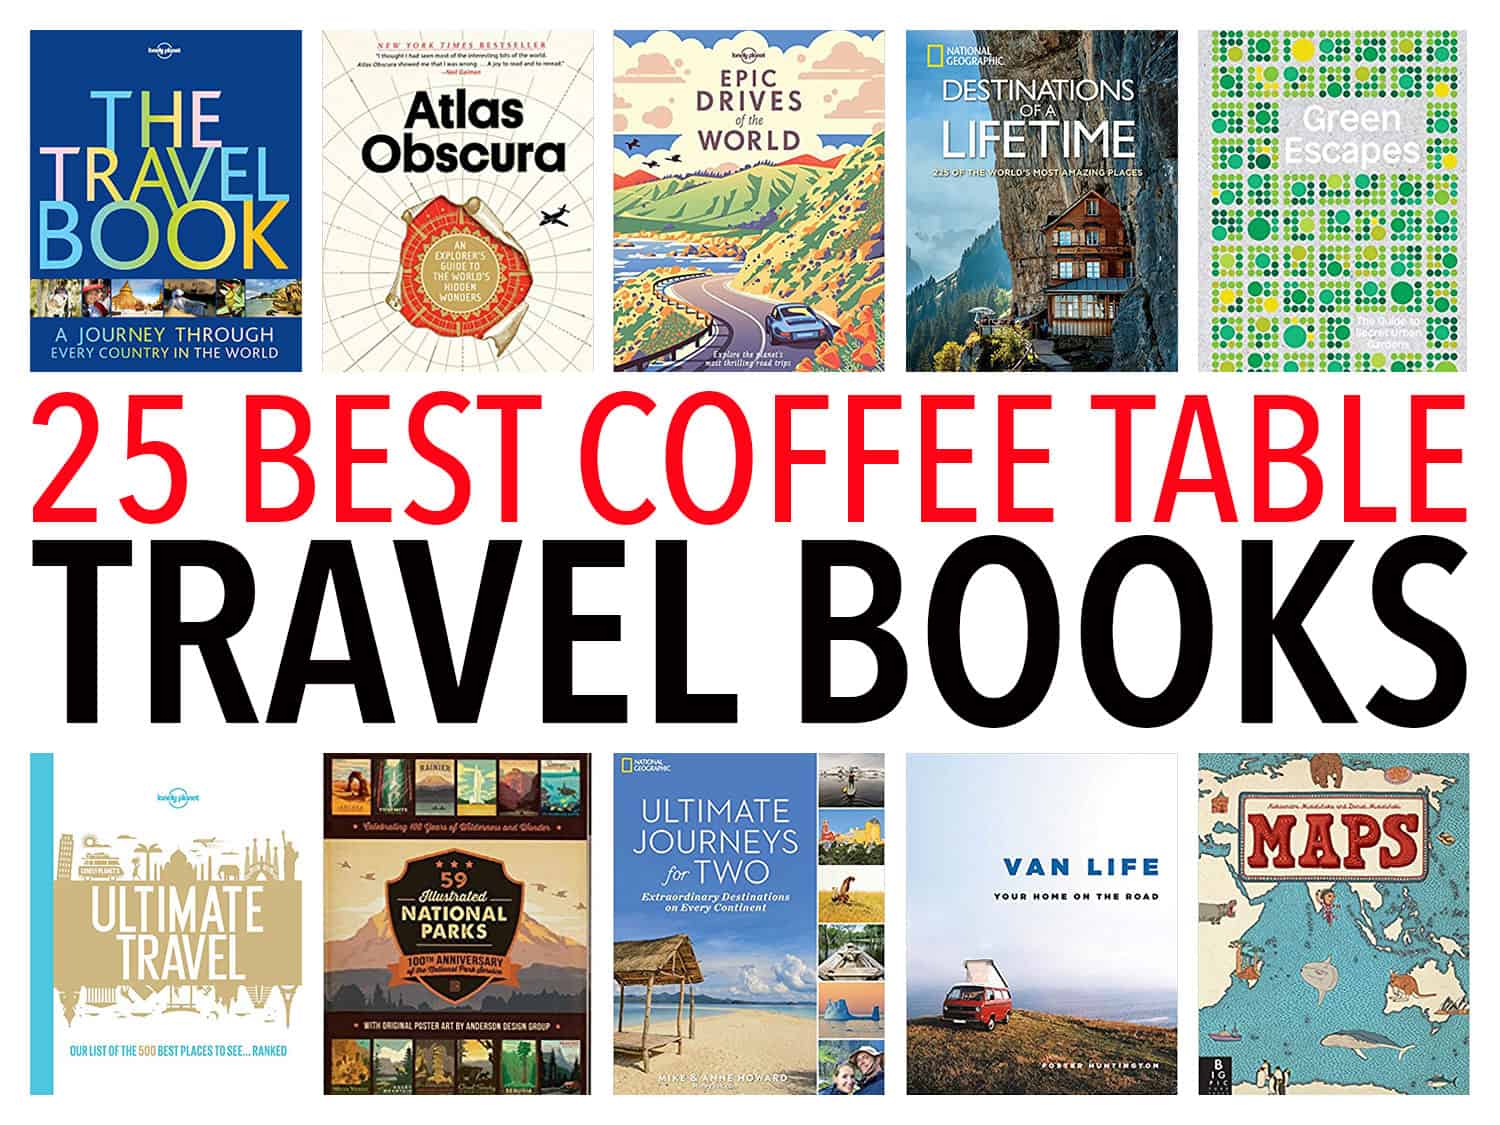 9 Best Coffee Table Books for Travelers